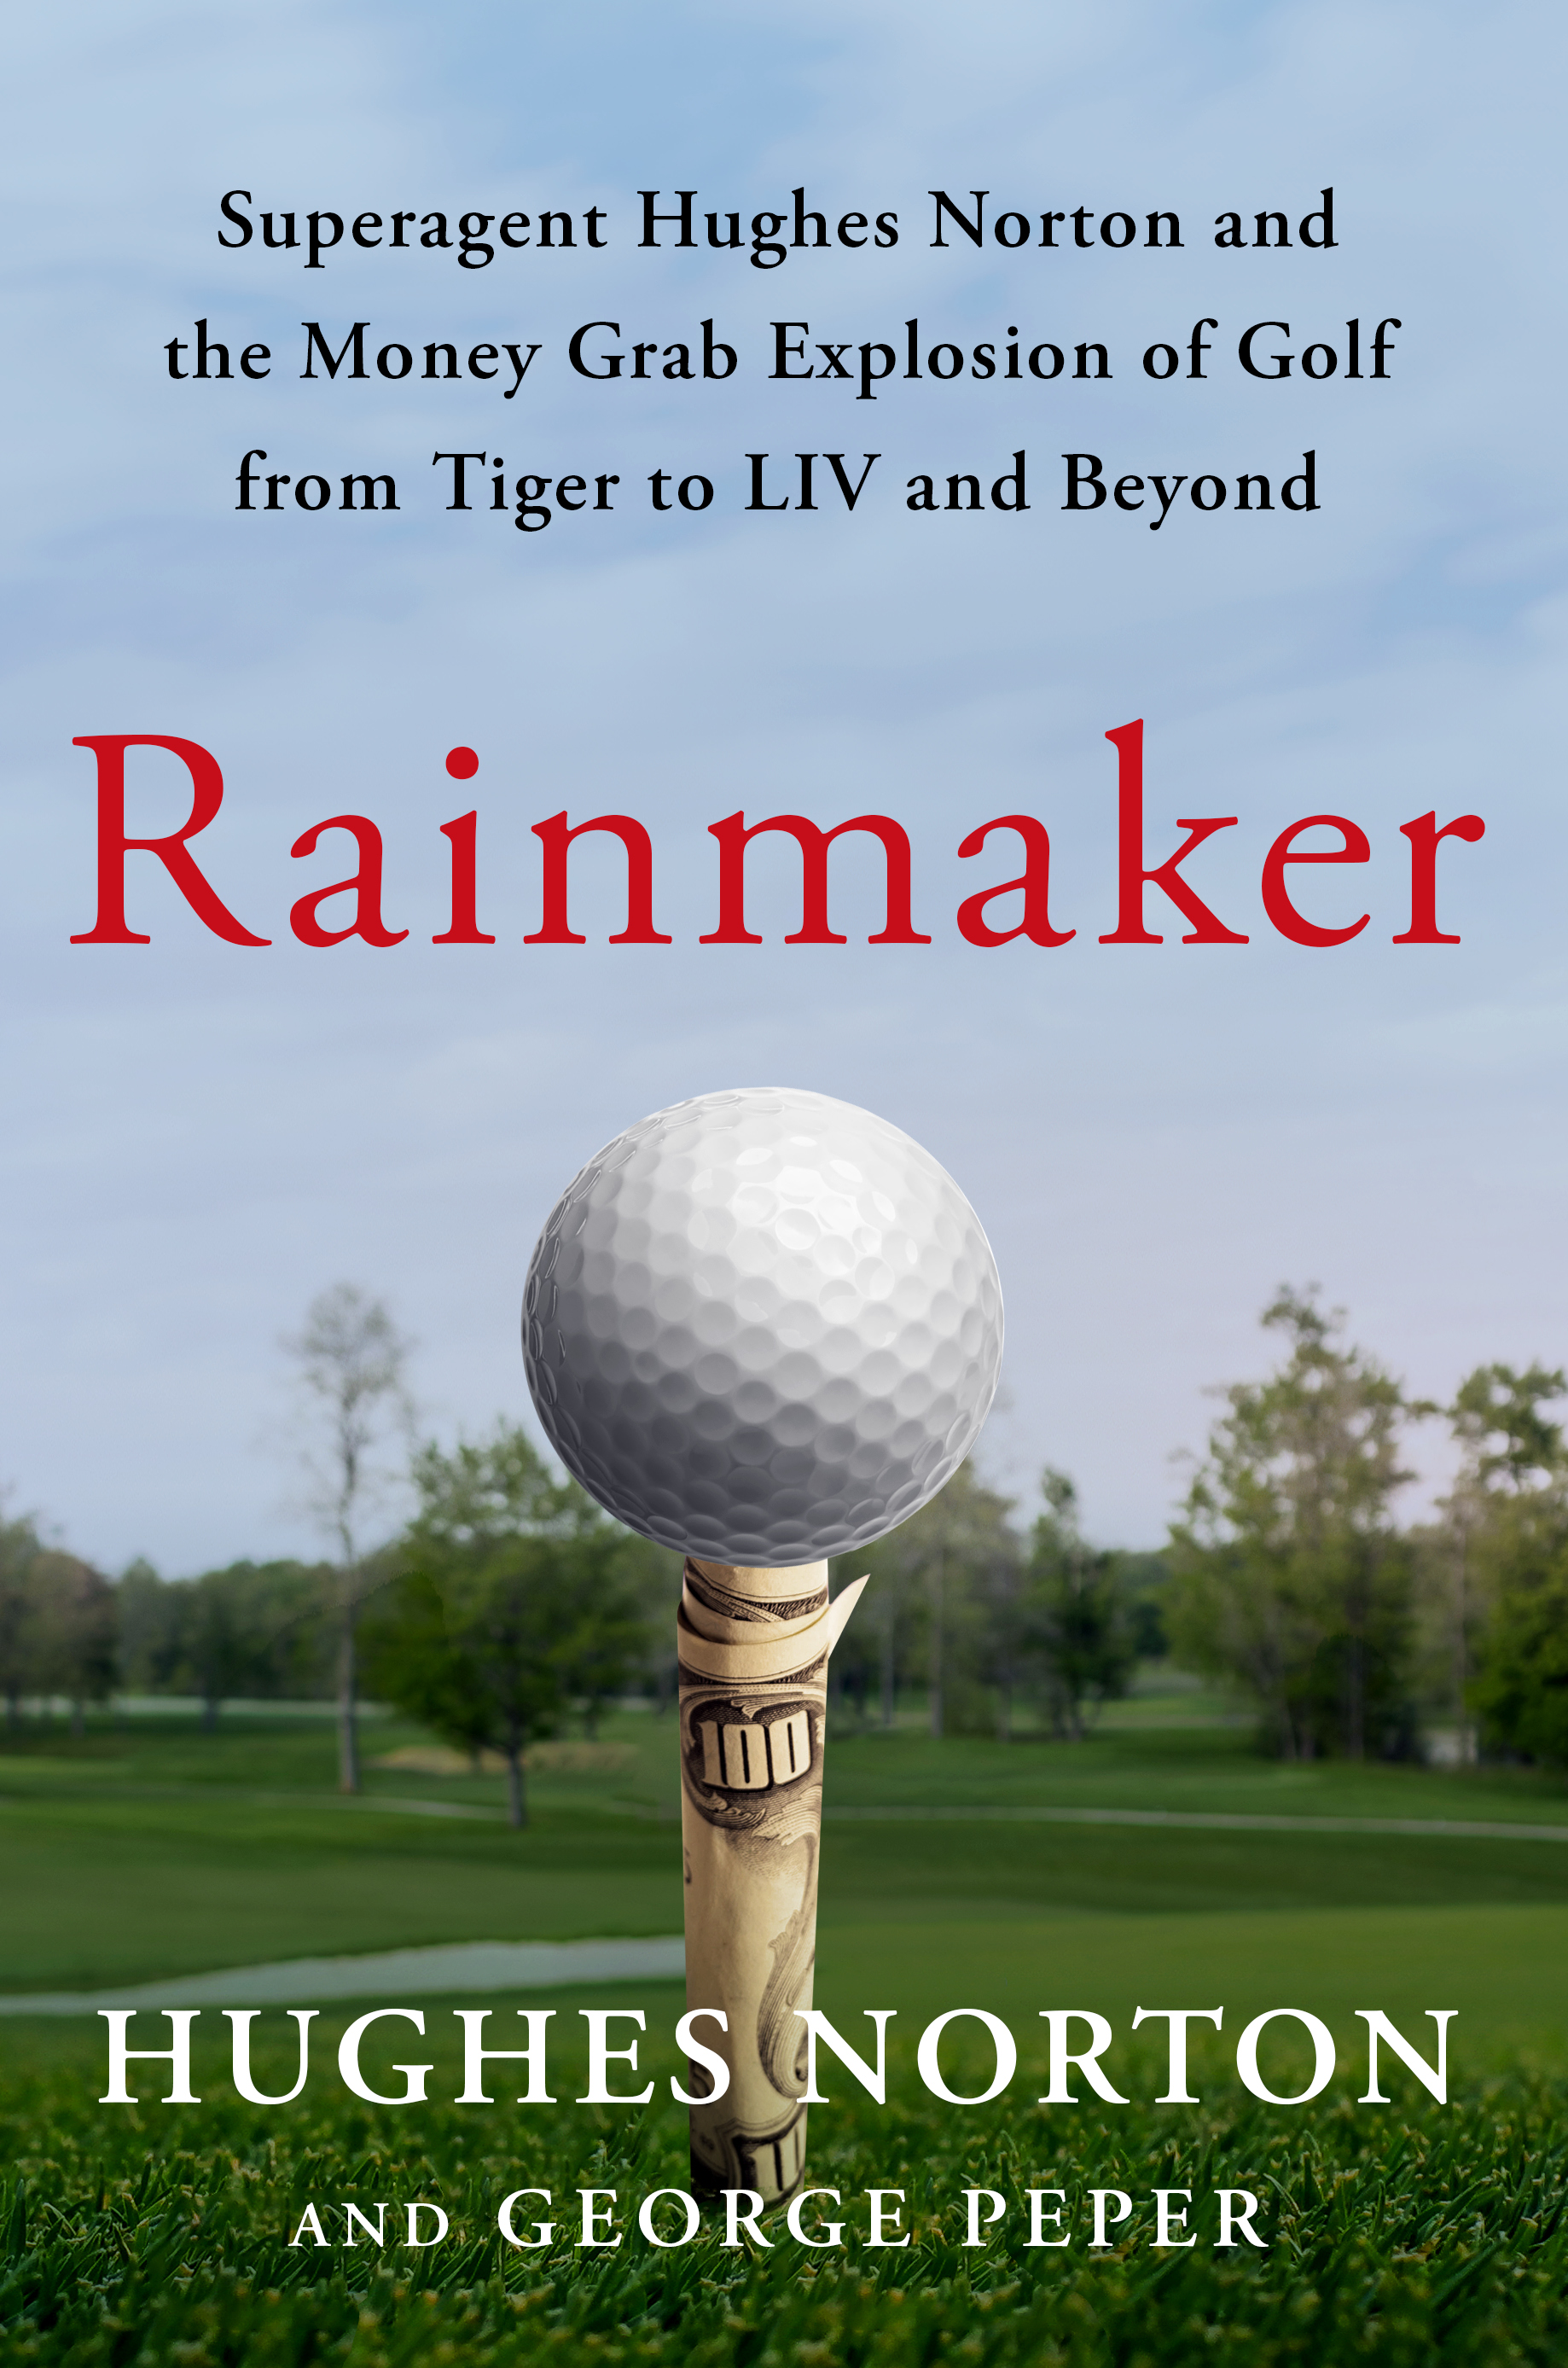 The cover of "Rainmaker."